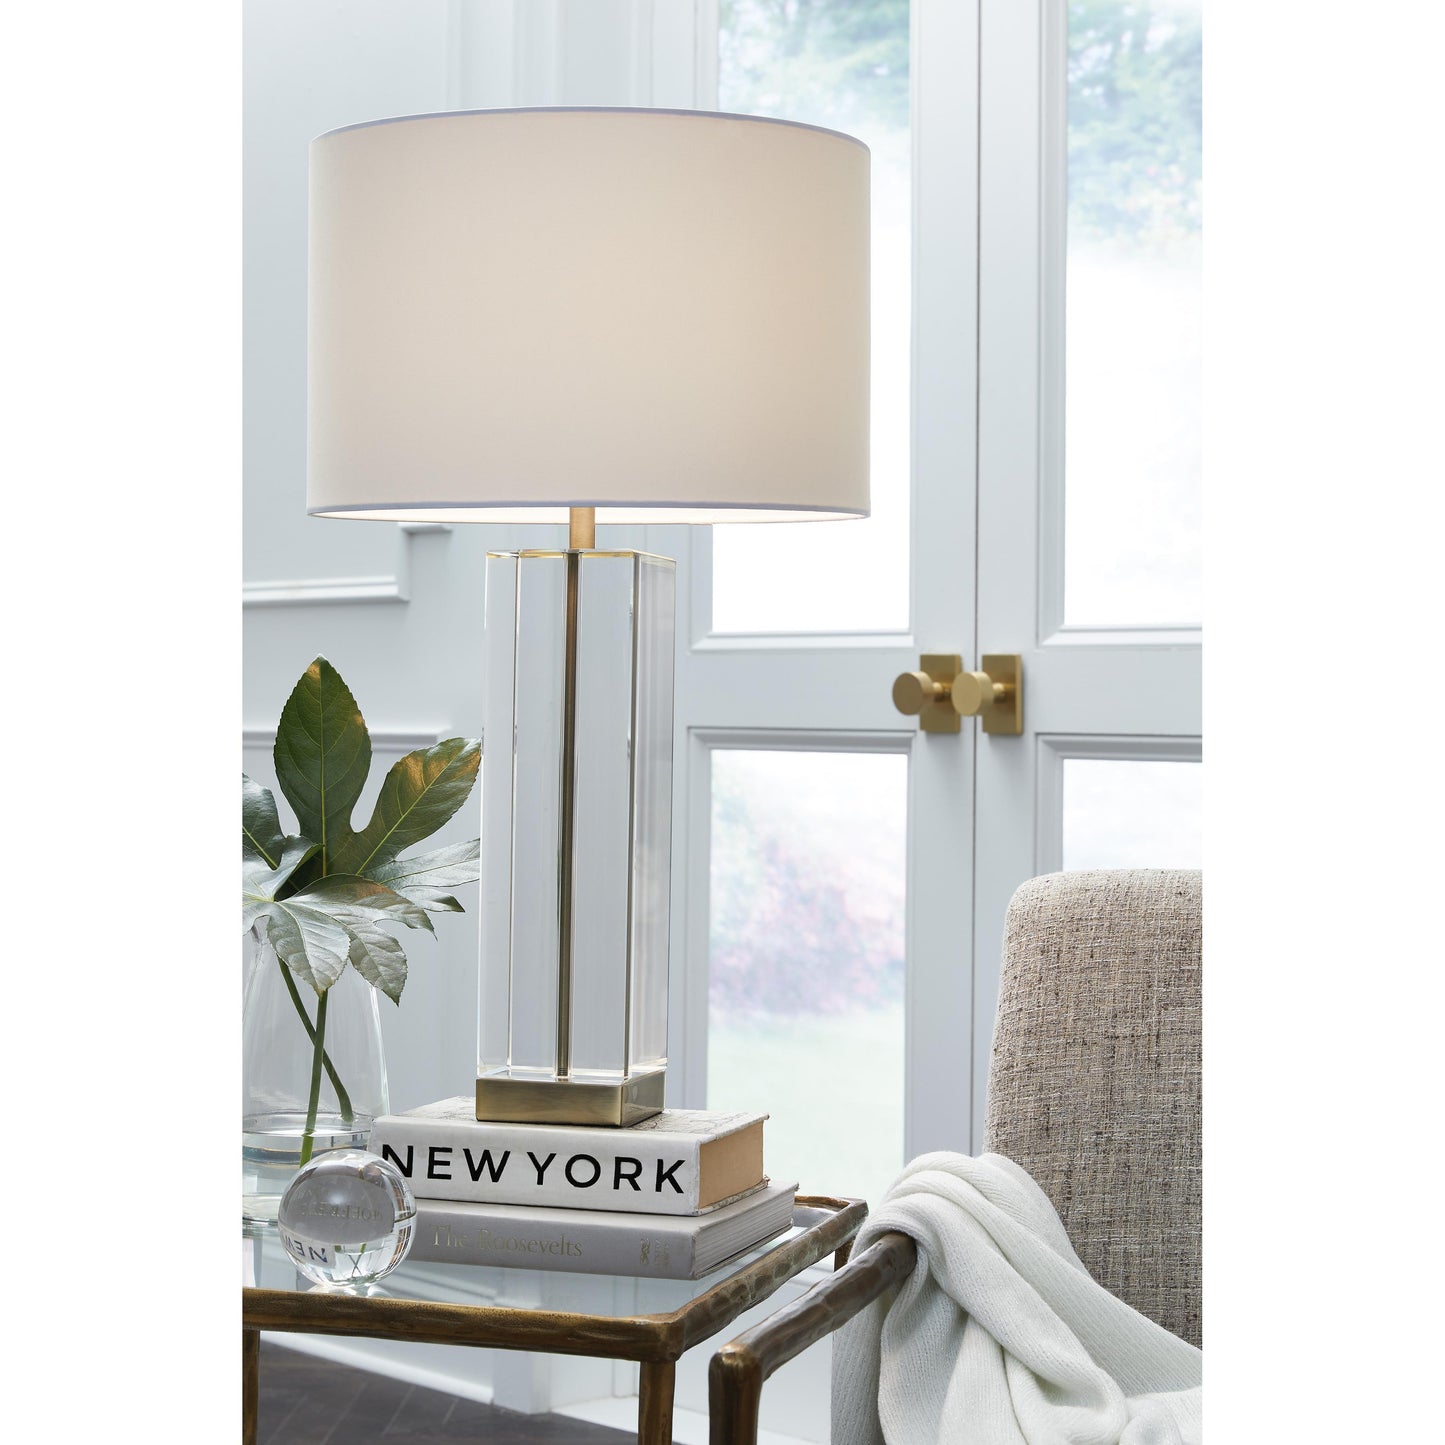 Signature Design by Ashley Teelsen Table Lamp L428184 IMAGE 2